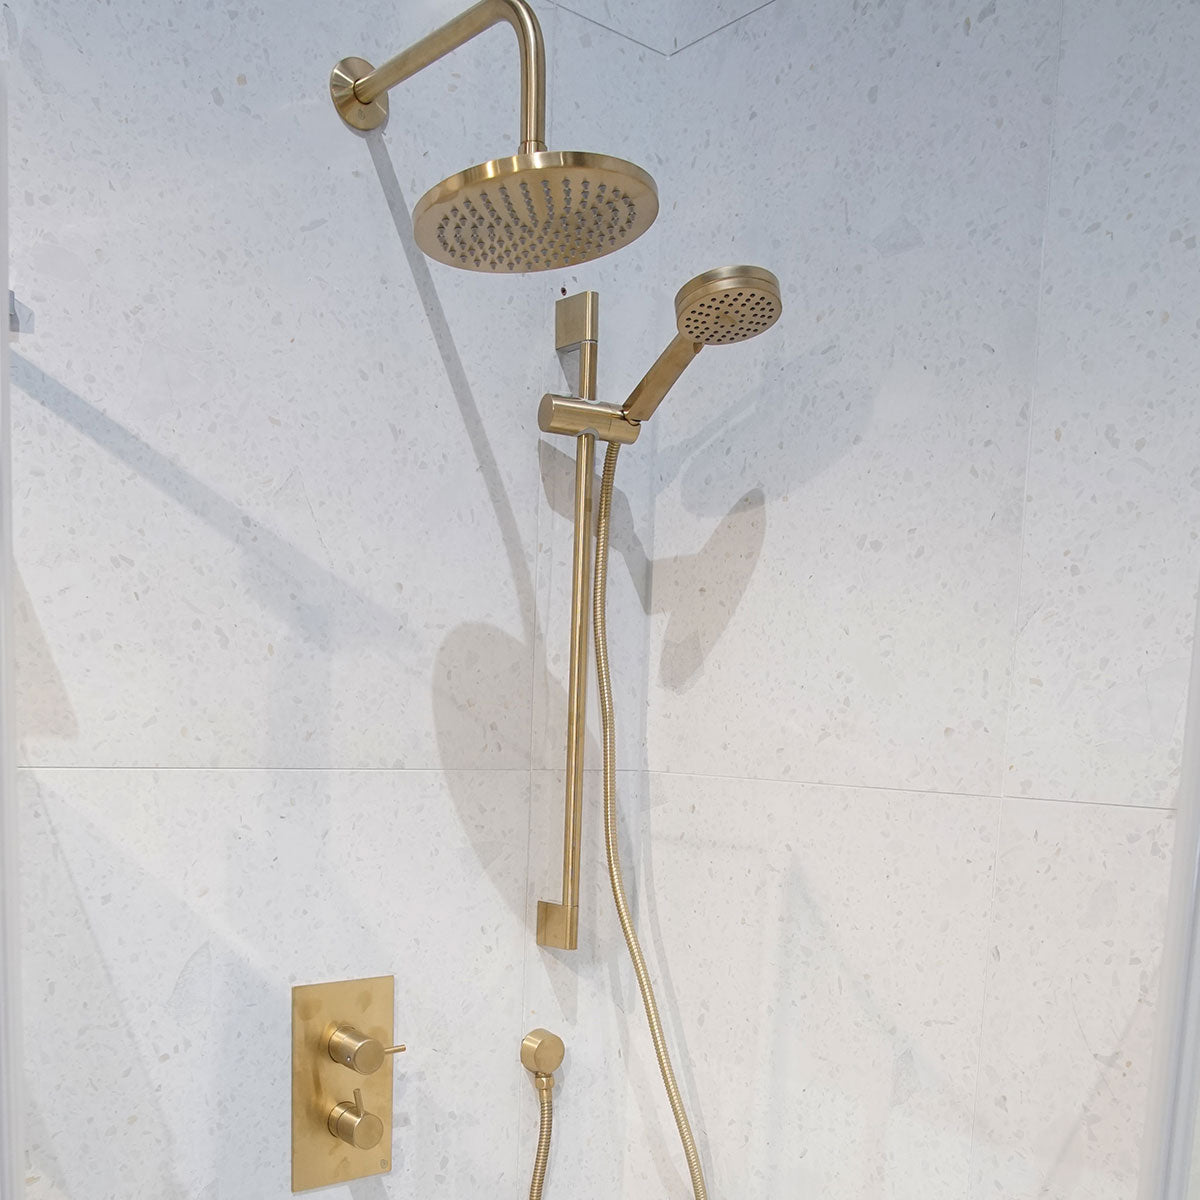 Hoxton Thermostatic Valve with Overhead Shower and Slide Rail Handset